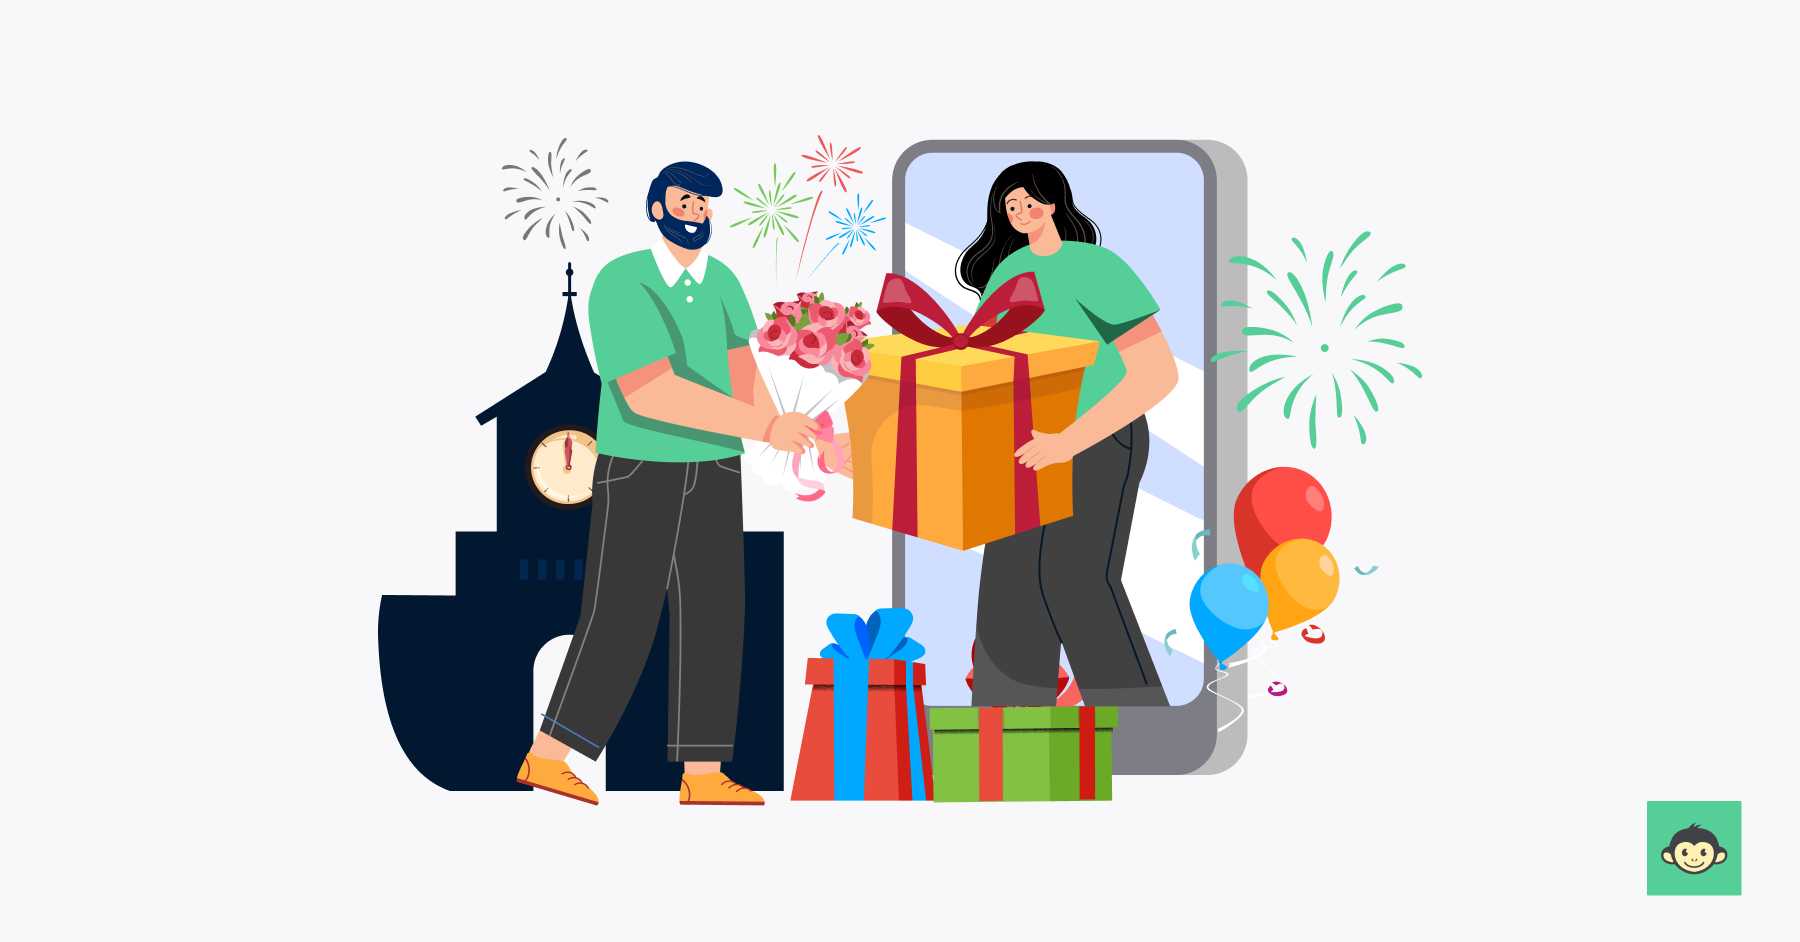 Top 10 Remote Employee Work Anniversary Ideas and Gifts